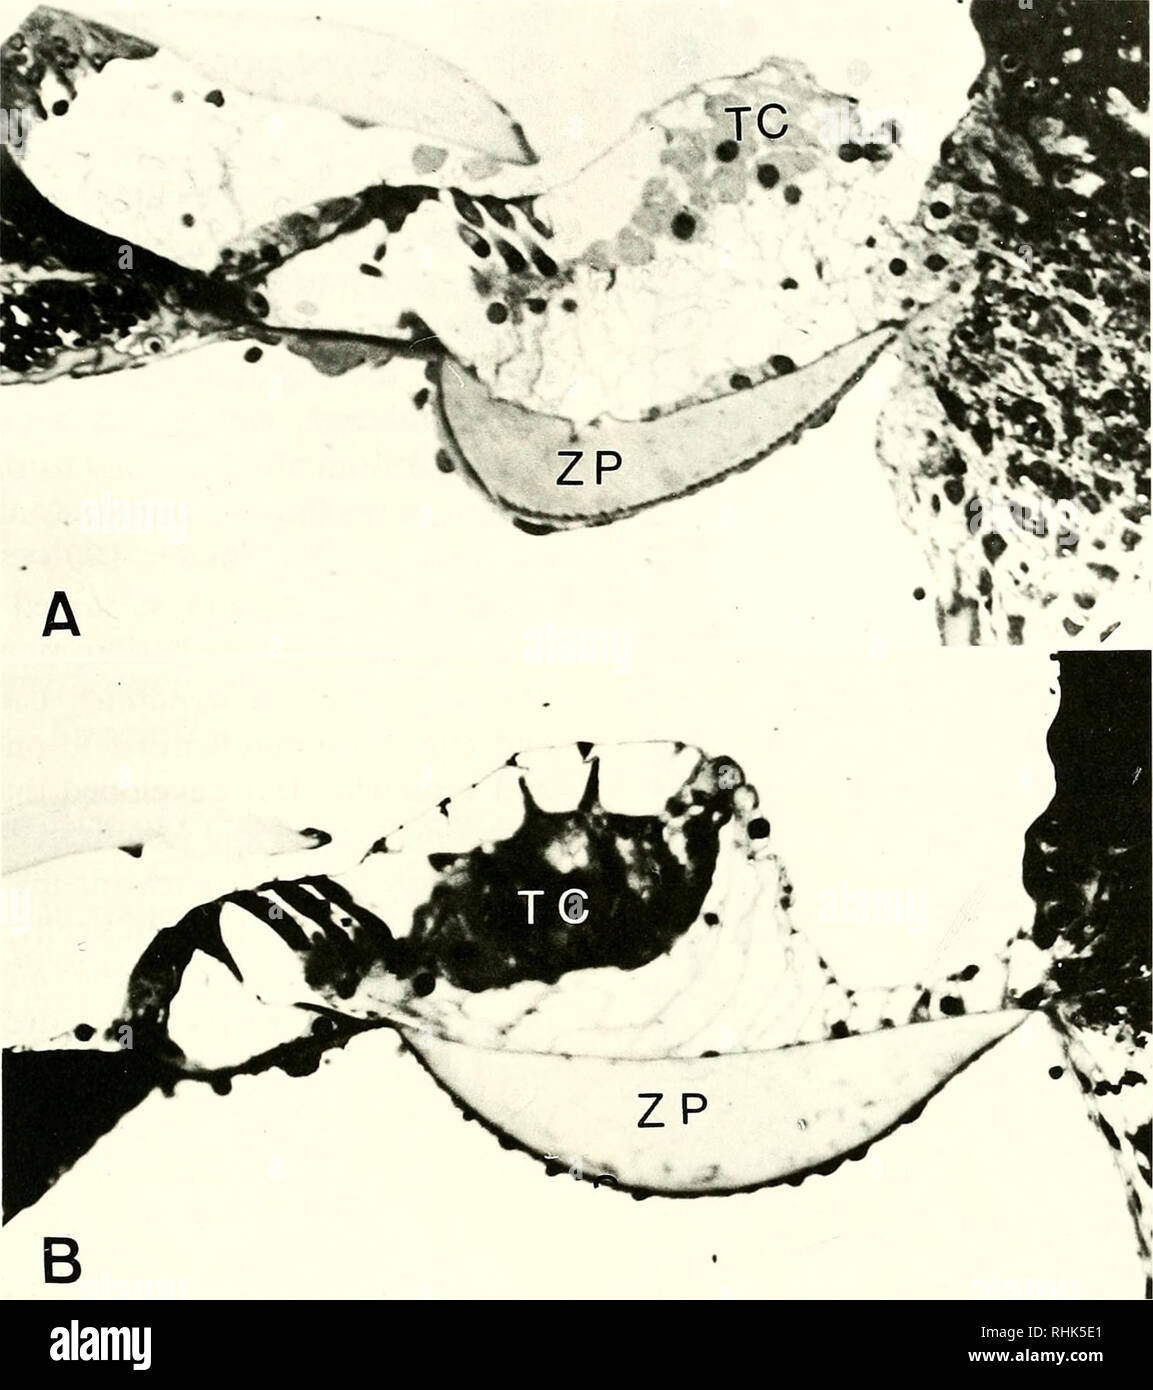 . Biology of the Heteromyidae. Heteromyidae. HETEROMYID EAR 283. Fig. 10. —Organ of Corti in the second cochlear turn. A. Perognathus longimembris. B. Microdi- podops pallidus. TC = tectal cells, ZP = zona pectinata of basilar membrane. The degree of development and morphol- ogy of one type of these border cells is unique to Microdipodops, Dipodomys, Perogna- thus, and Chaetognathus among all mam- mal species studied to date. Webster (1961) and Webster and Webster (1975,1977) con- tend that these cells are homologous with the Henson's cells as described for all other mammal species studied. La Stock Photo